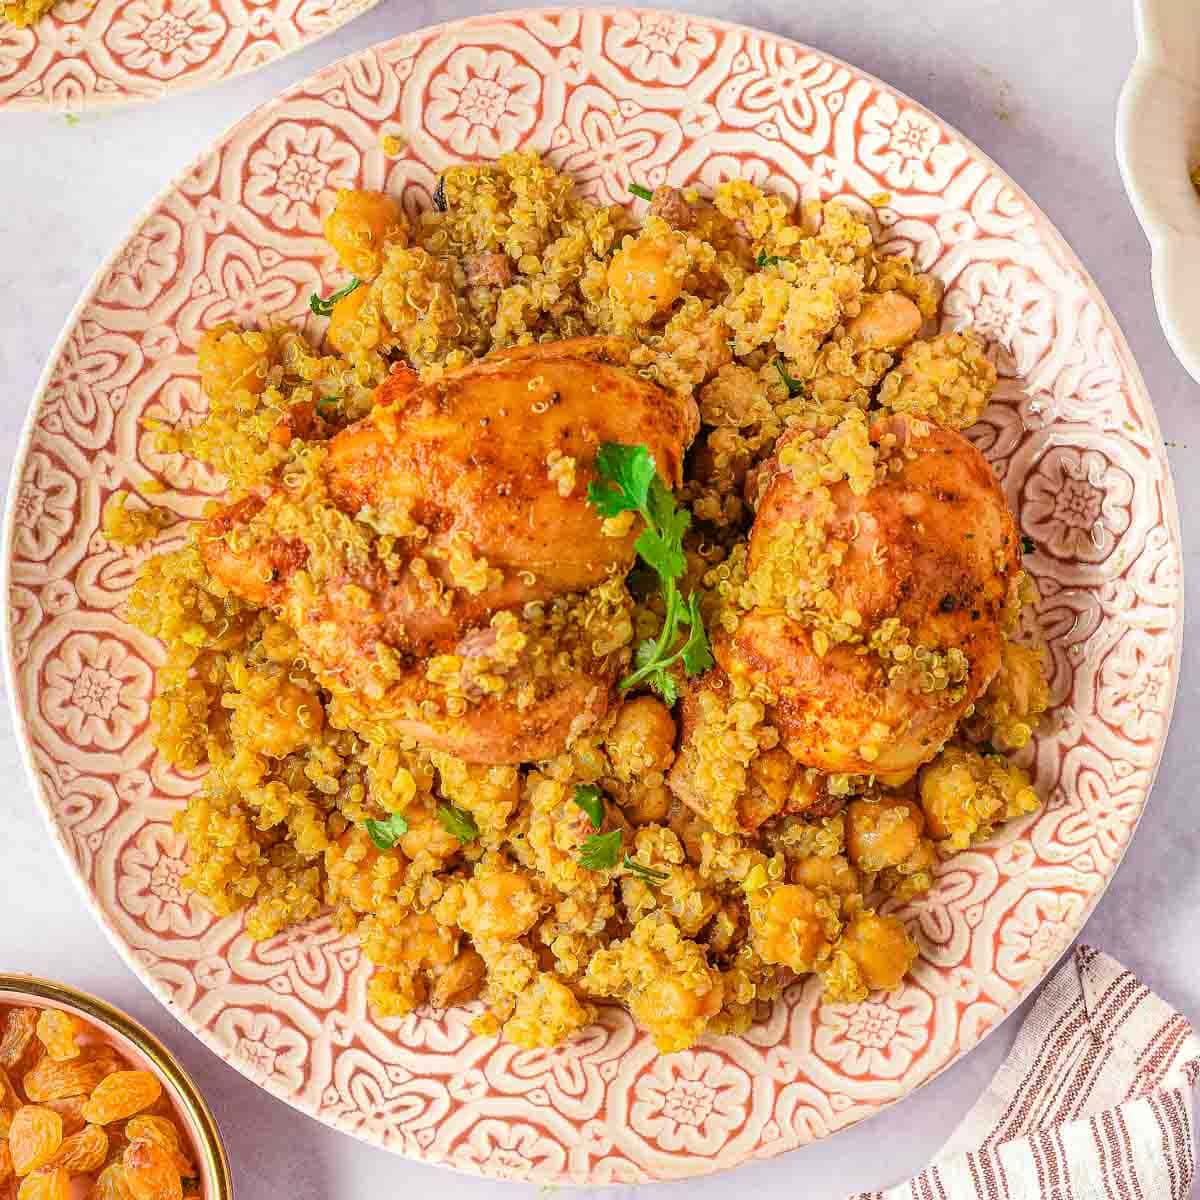 A plate of Moroccan chicken thighs tagine with quinoa and chickpeas, garnished with fresh parsley.